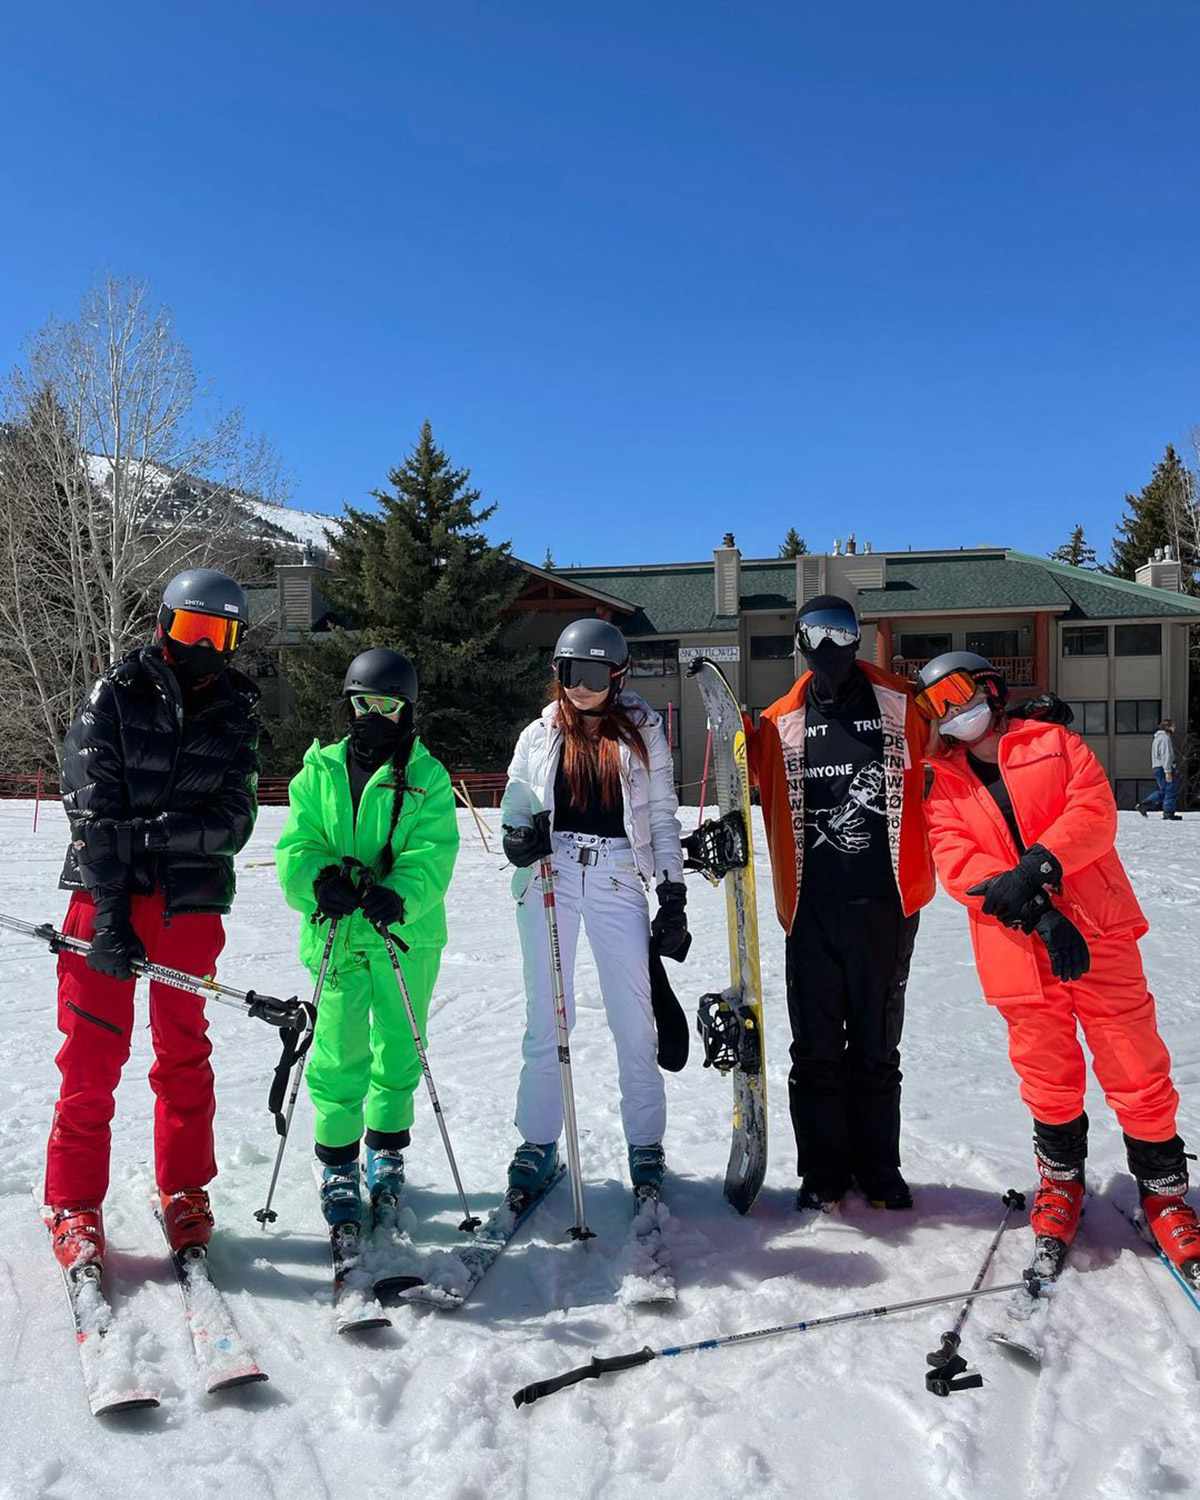 Kourtney Kardashian spends time with Travis Barker and his kids in ski vacation photos